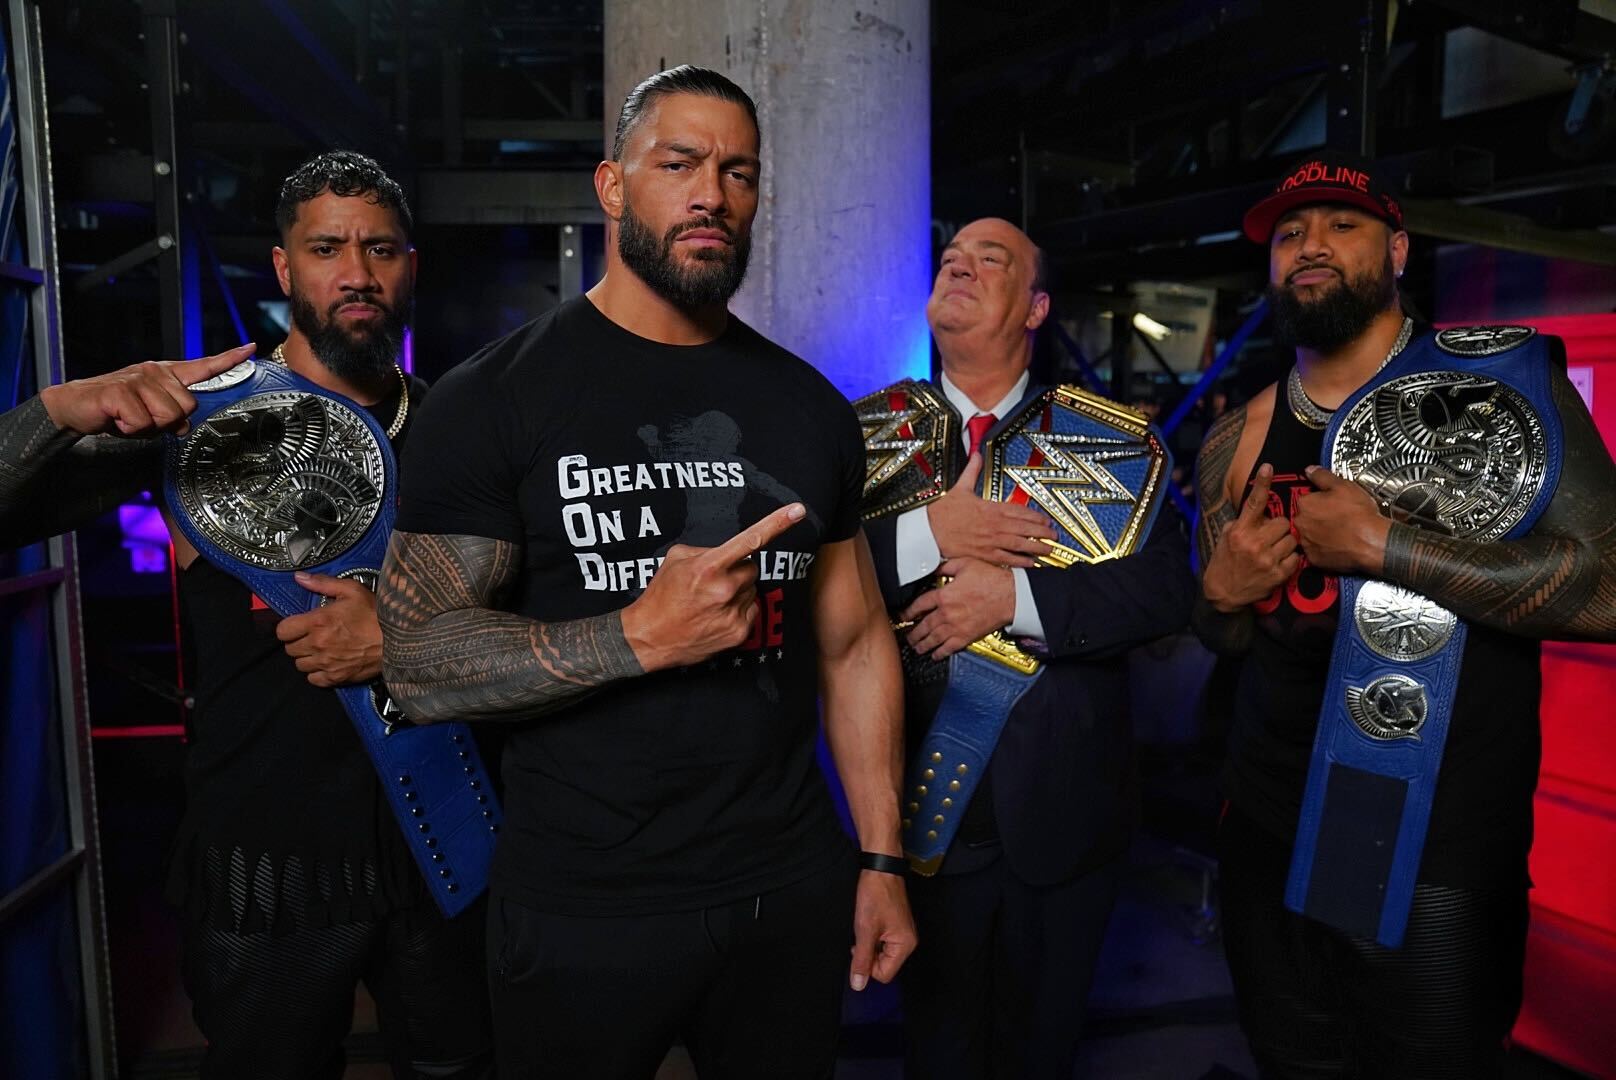 Roman Reigns is now the WWE Undisputed Universal Champion